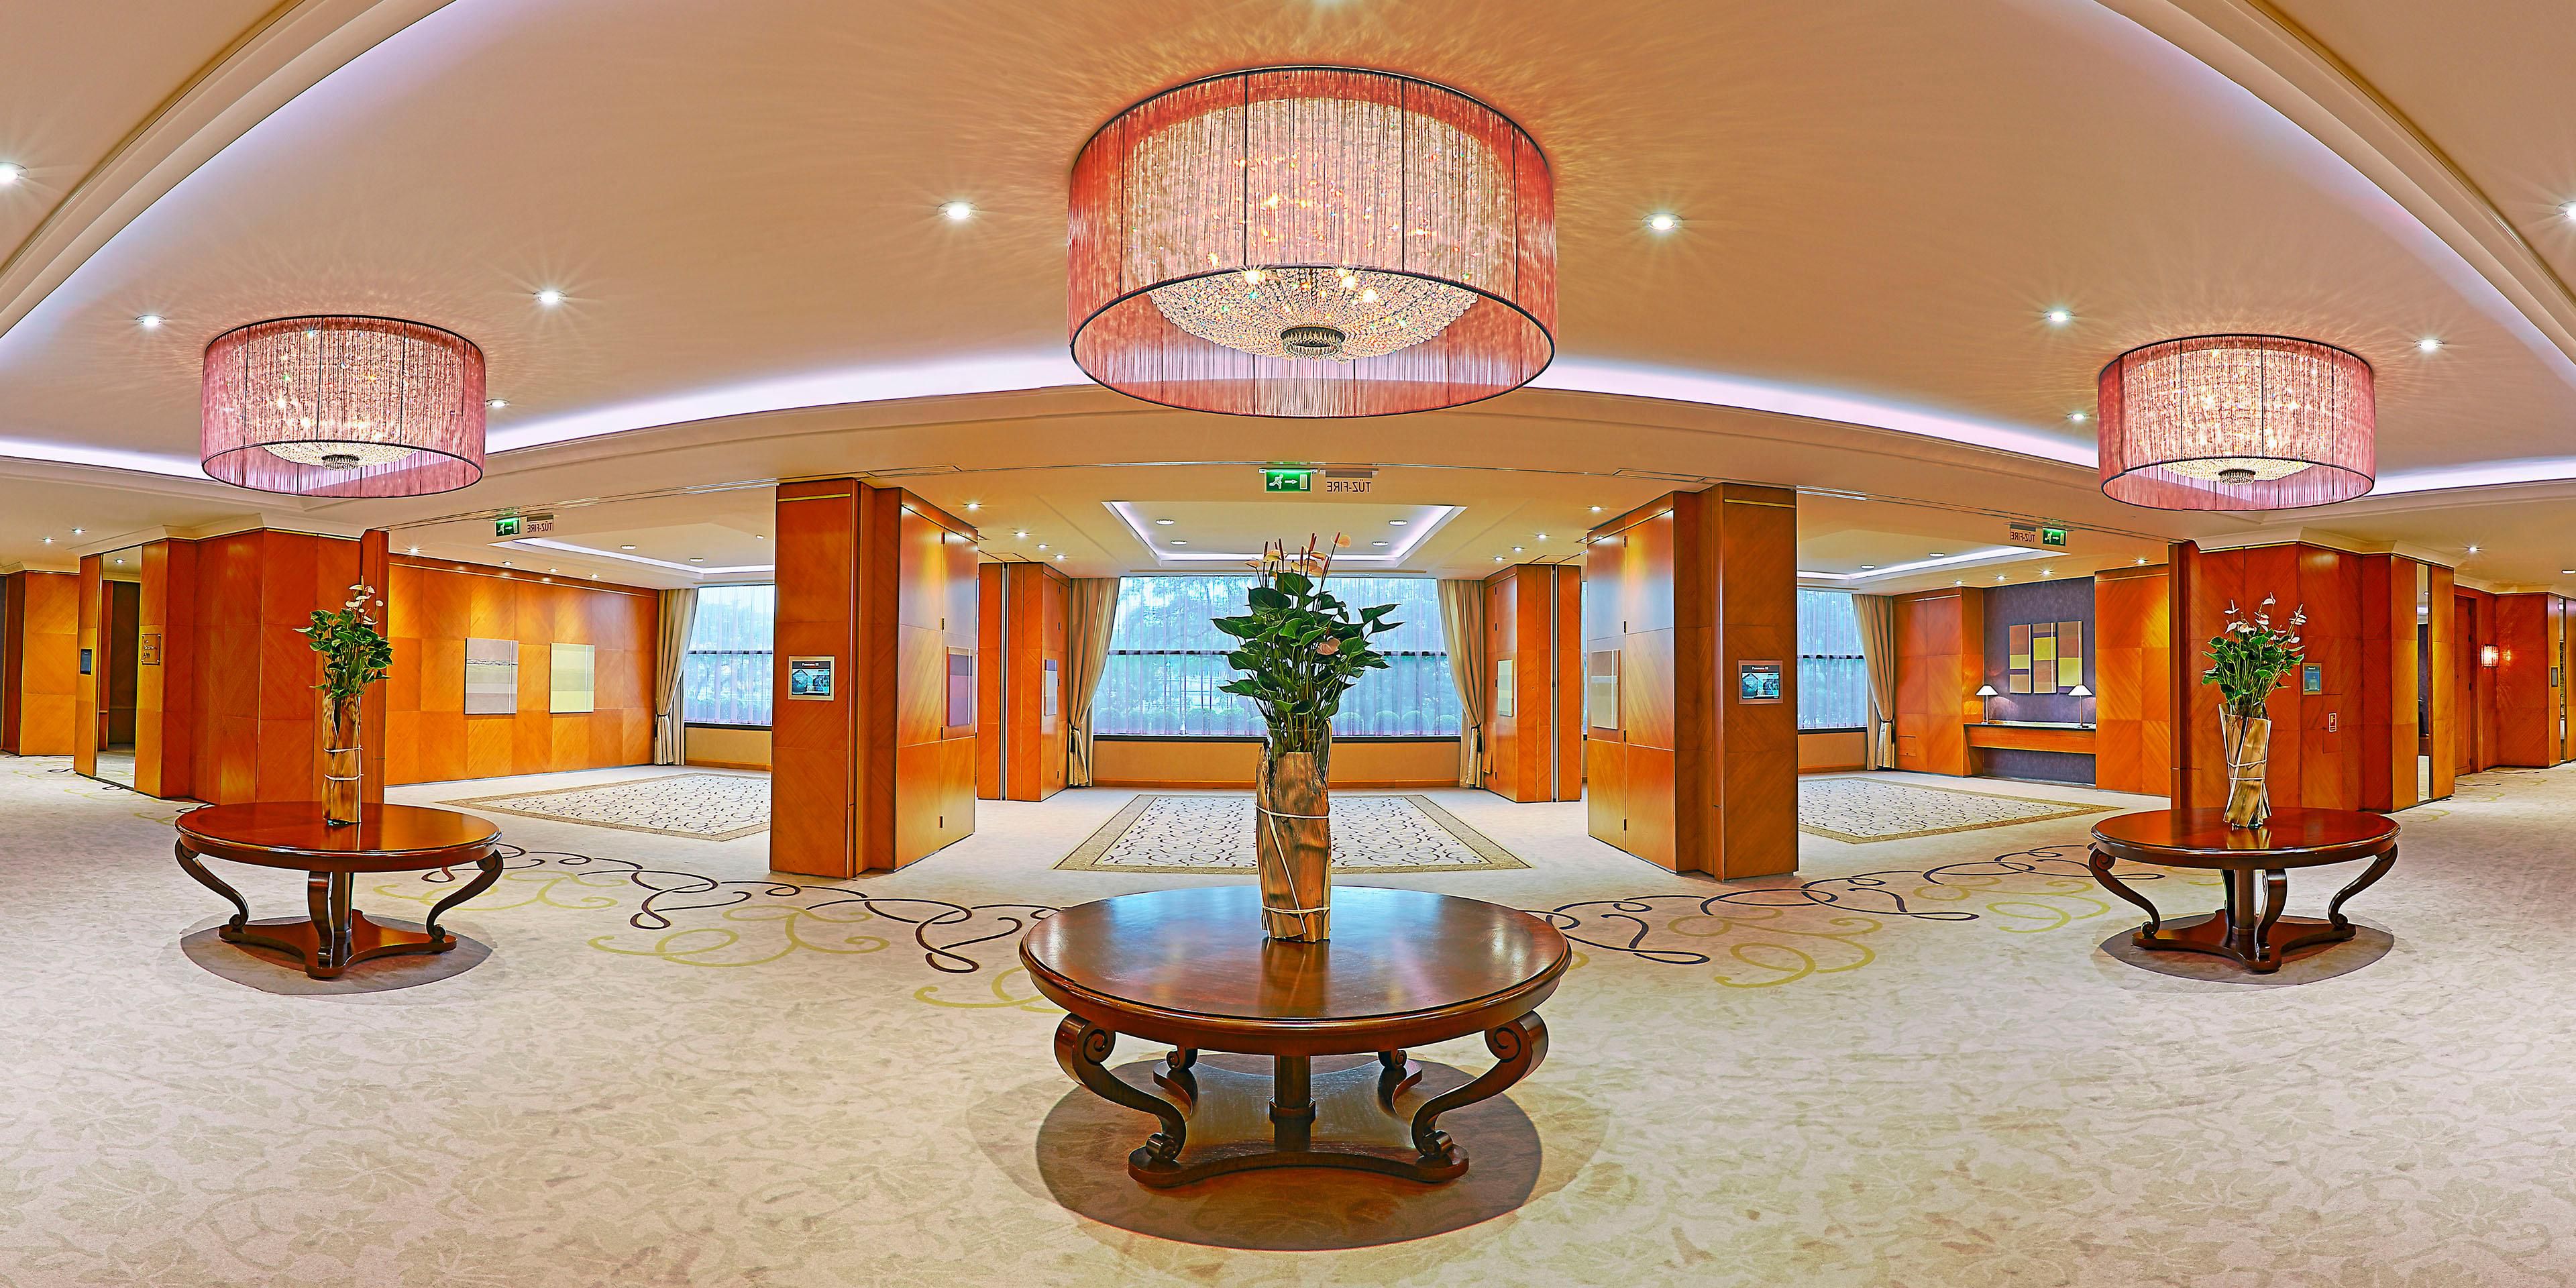 Take an interactive journey through the hotel’s 12 meeting rooms and the Club InterContinental, all located on the first floor of the building.